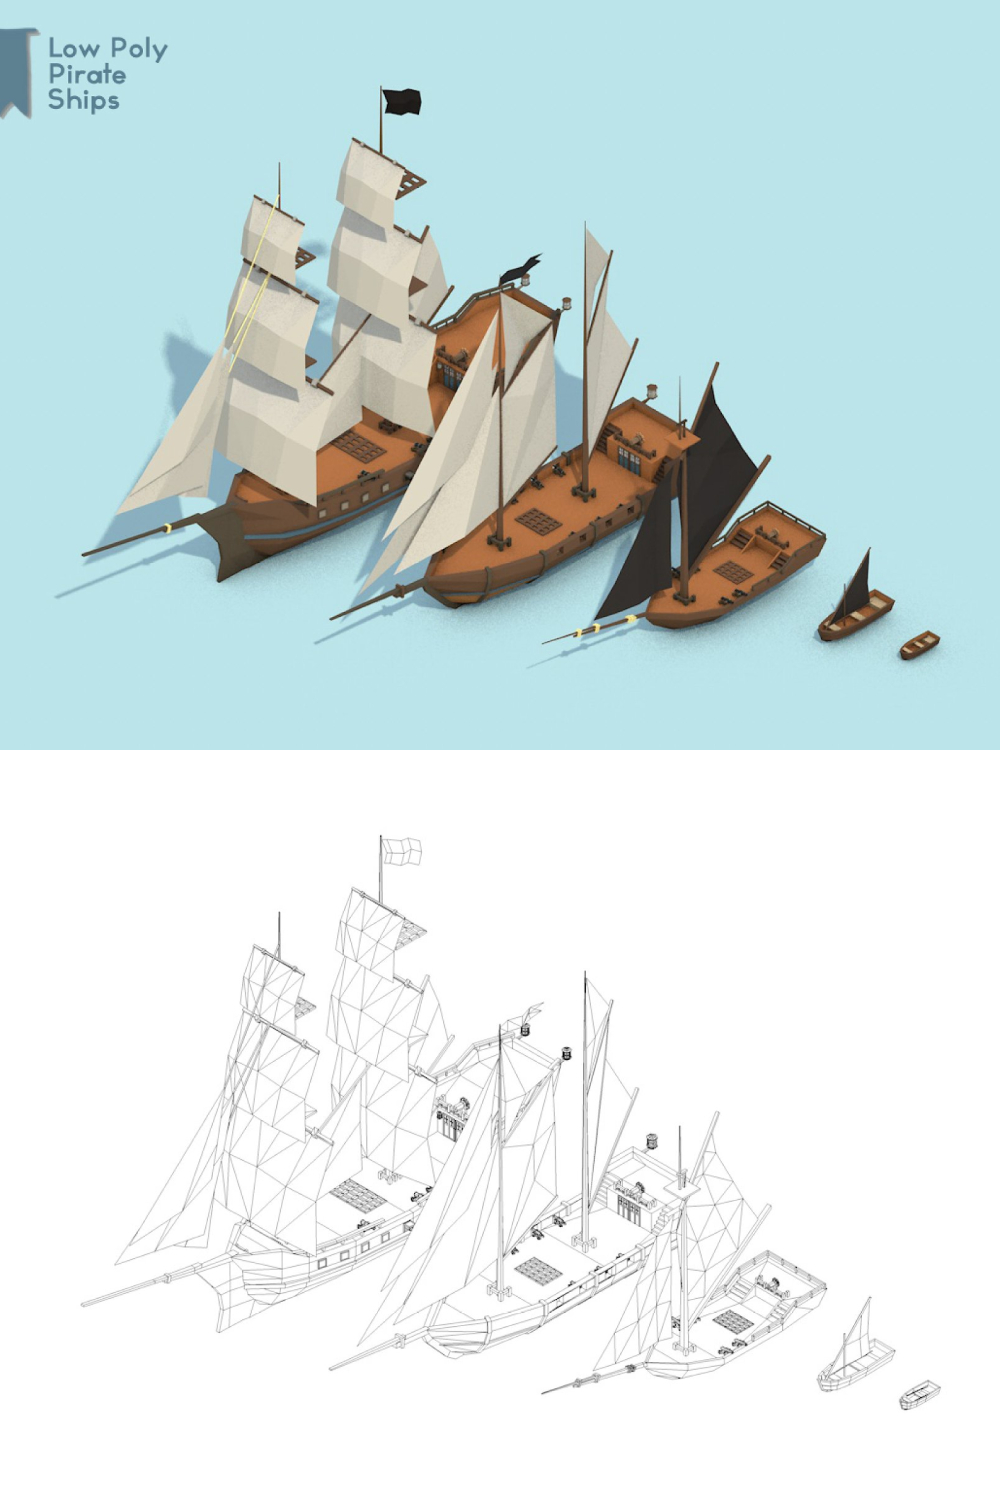 Low Poly Pirate Ships - Pinterest.